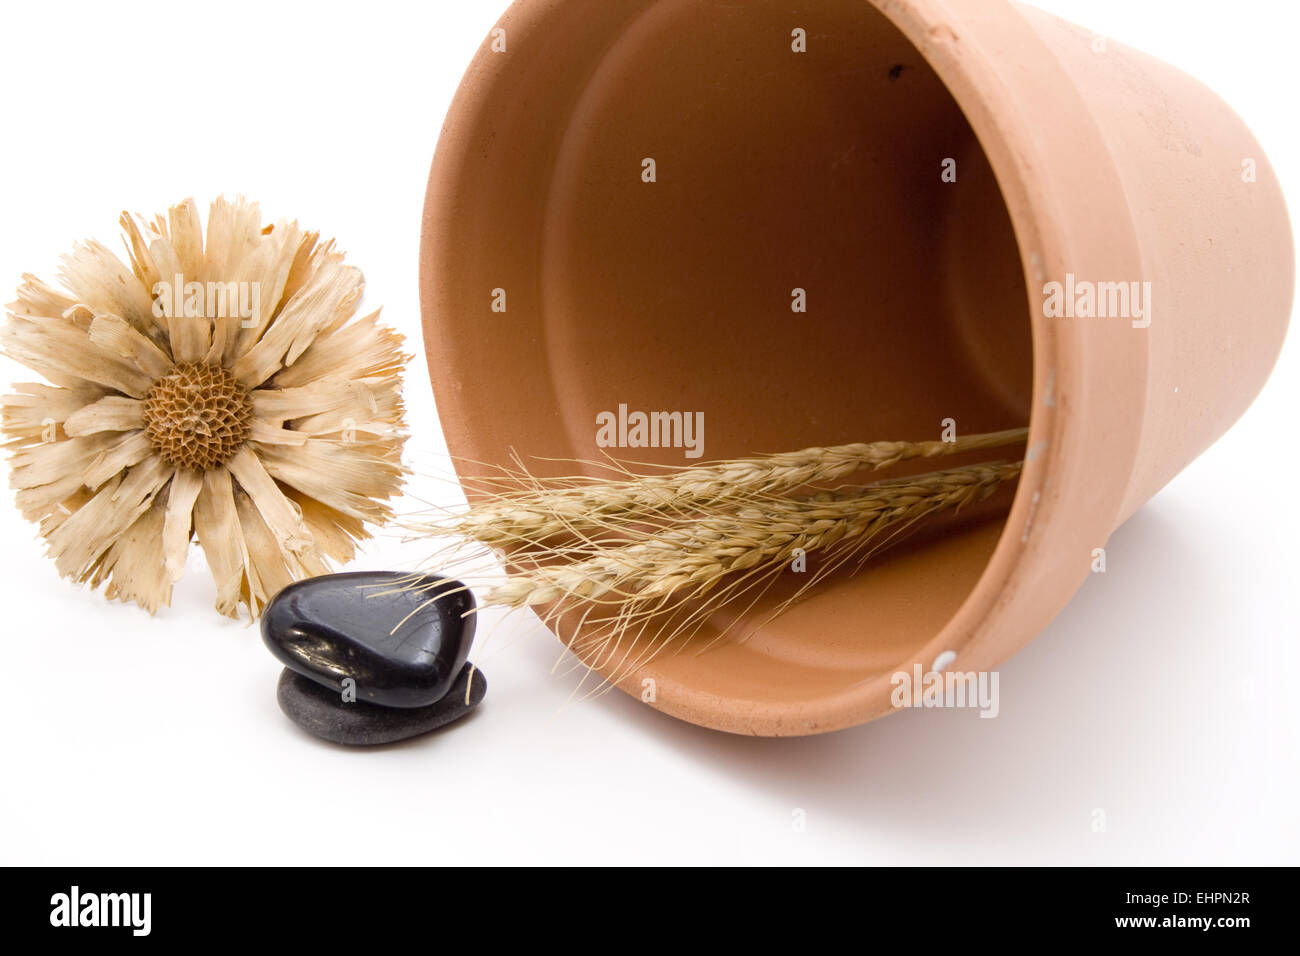 Wheat ear with plant pot Stock Photo